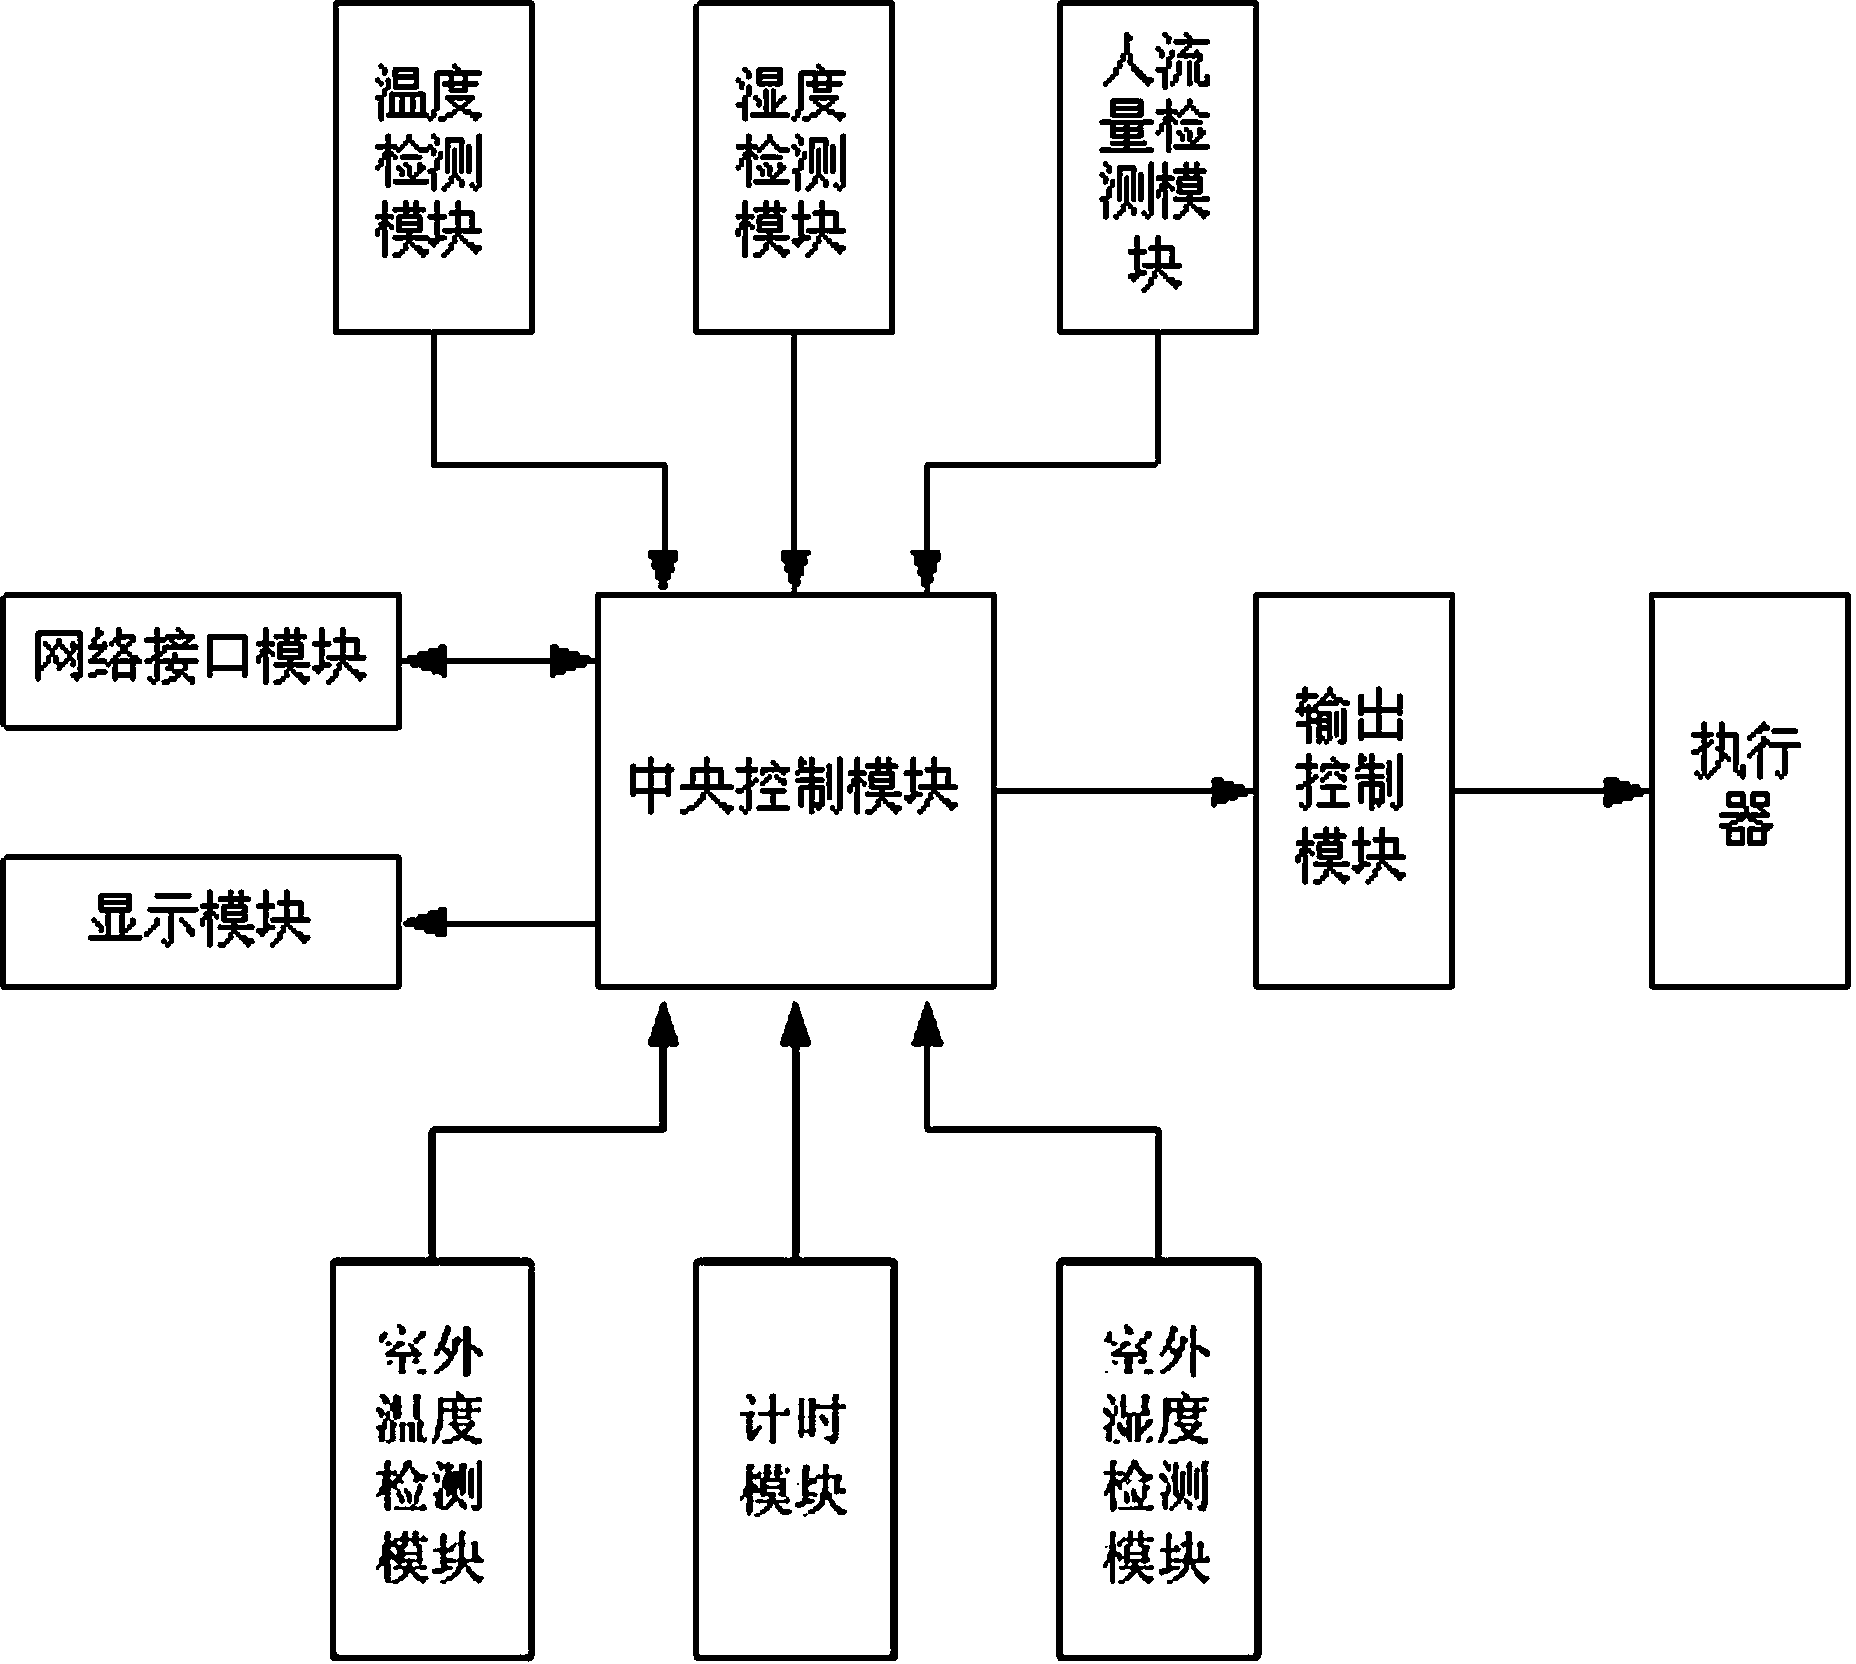 Intelligent temperature controller applied to heating and ventilation charging and load optimizing energy saving system